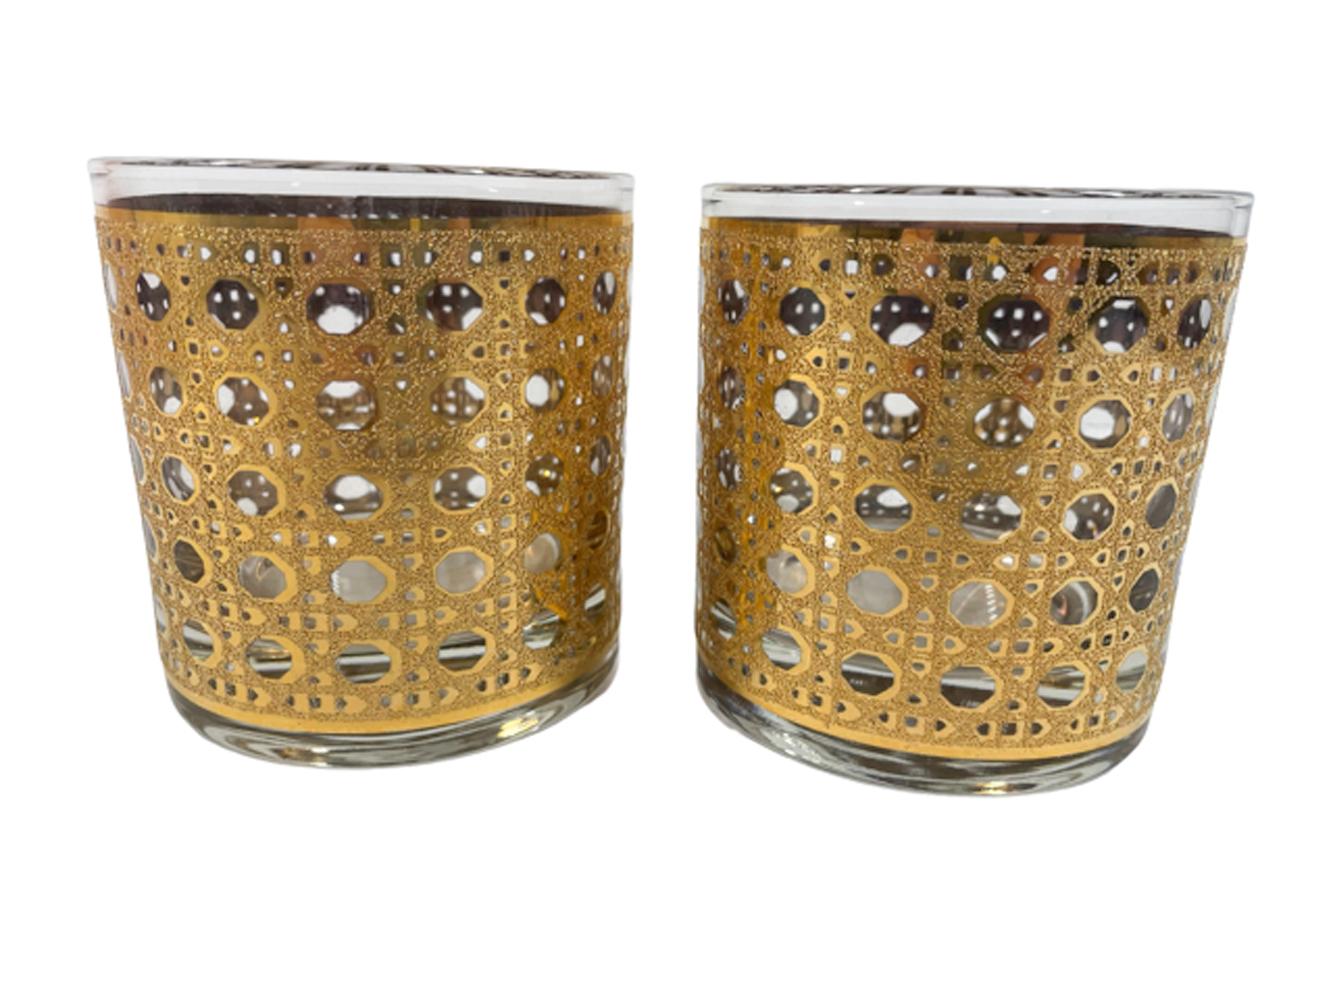 American Four Vintage Rocks Glasses by Culver LTD, in the Canella Pattern, 22k Gold Cane For Sale